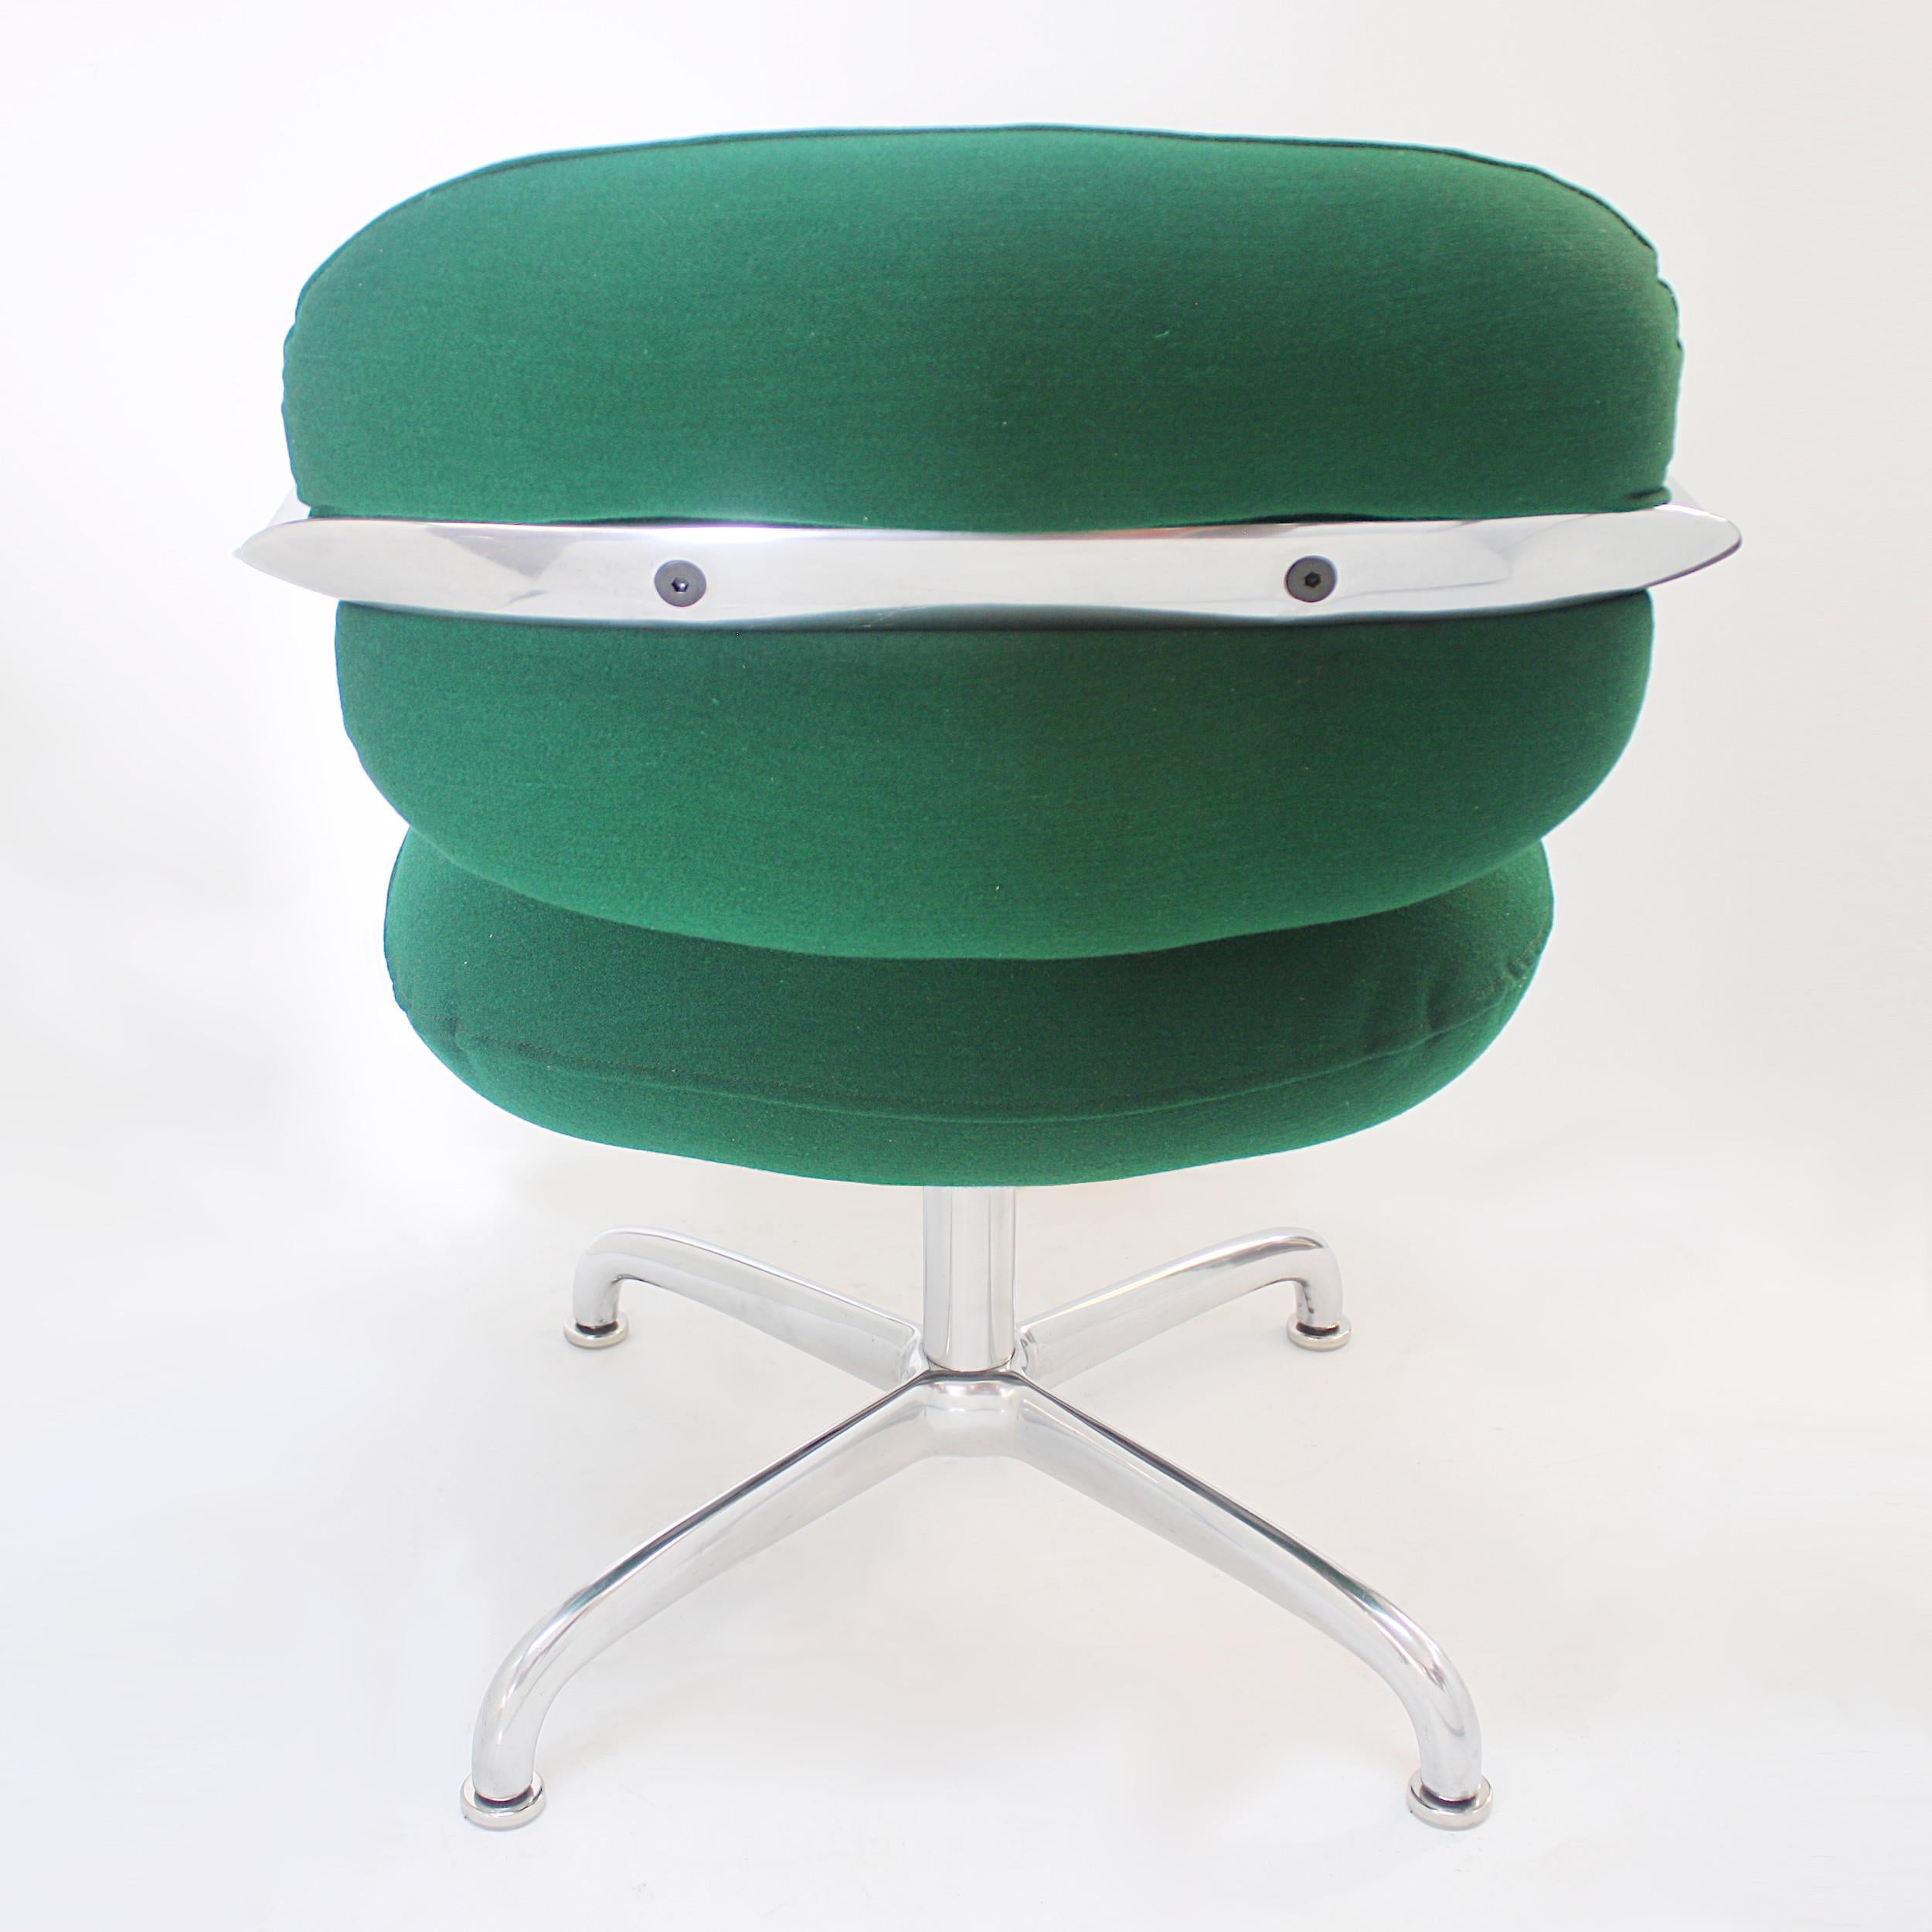 North American Mid-Century Modern Swivel Desk Chair by Andrew Morrison & Bruce Hannah for Knoll